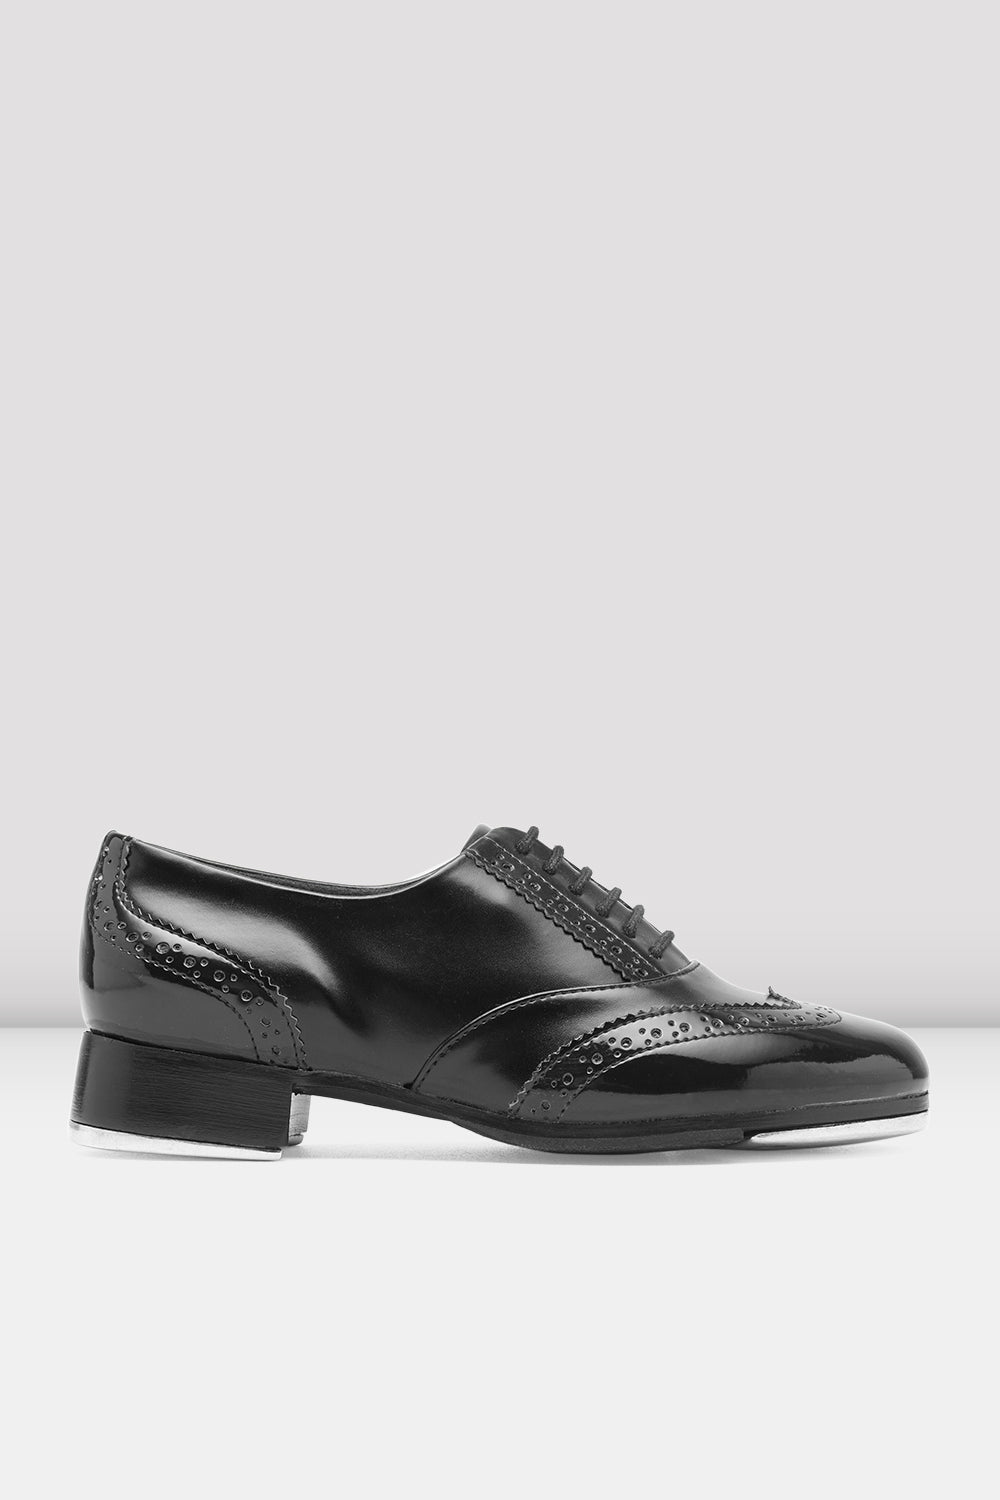 BLOCH Ladies Charleston Tap Shoes, Black Synthetic Leather